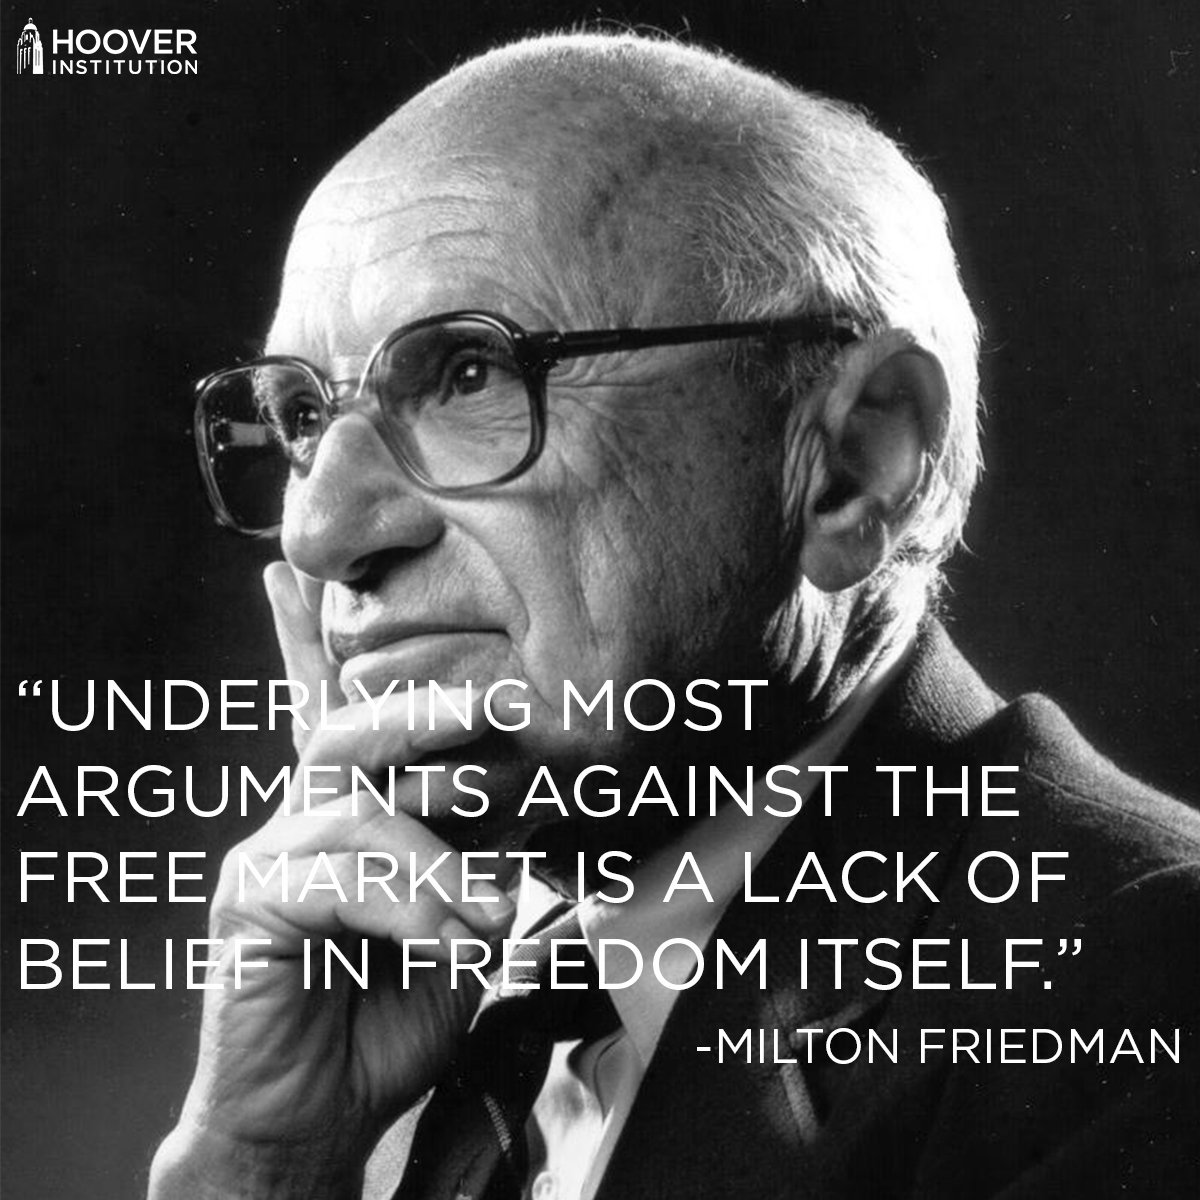 'Underlying most arguments against the free market is a lack of belief in freedom itself.' -Milton Friedman